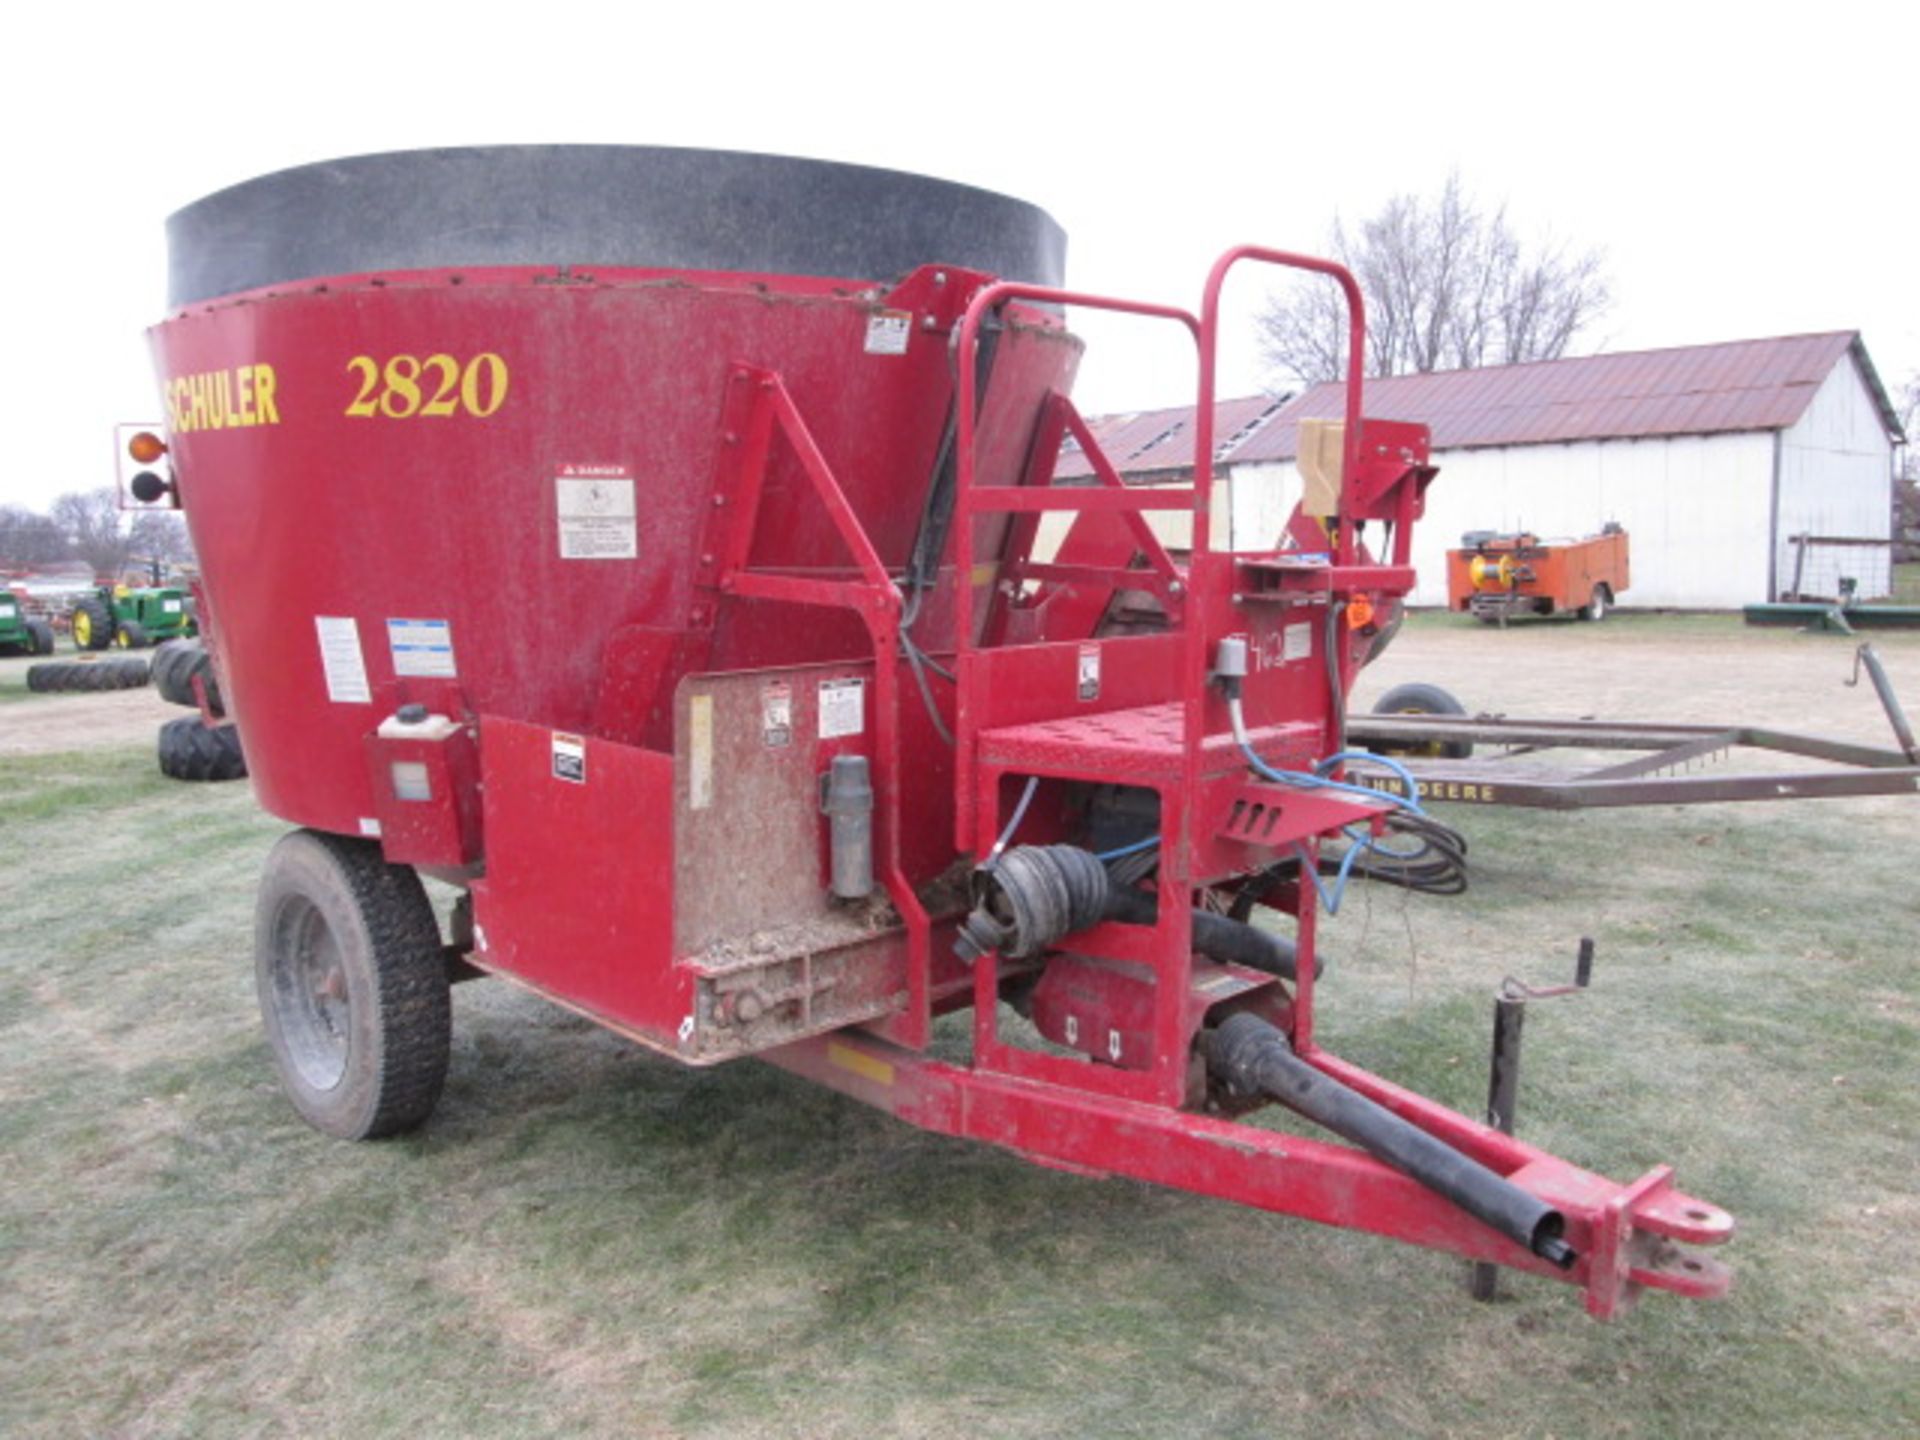 SCHULER 2820 MIXER FEED WAGON; SCALES